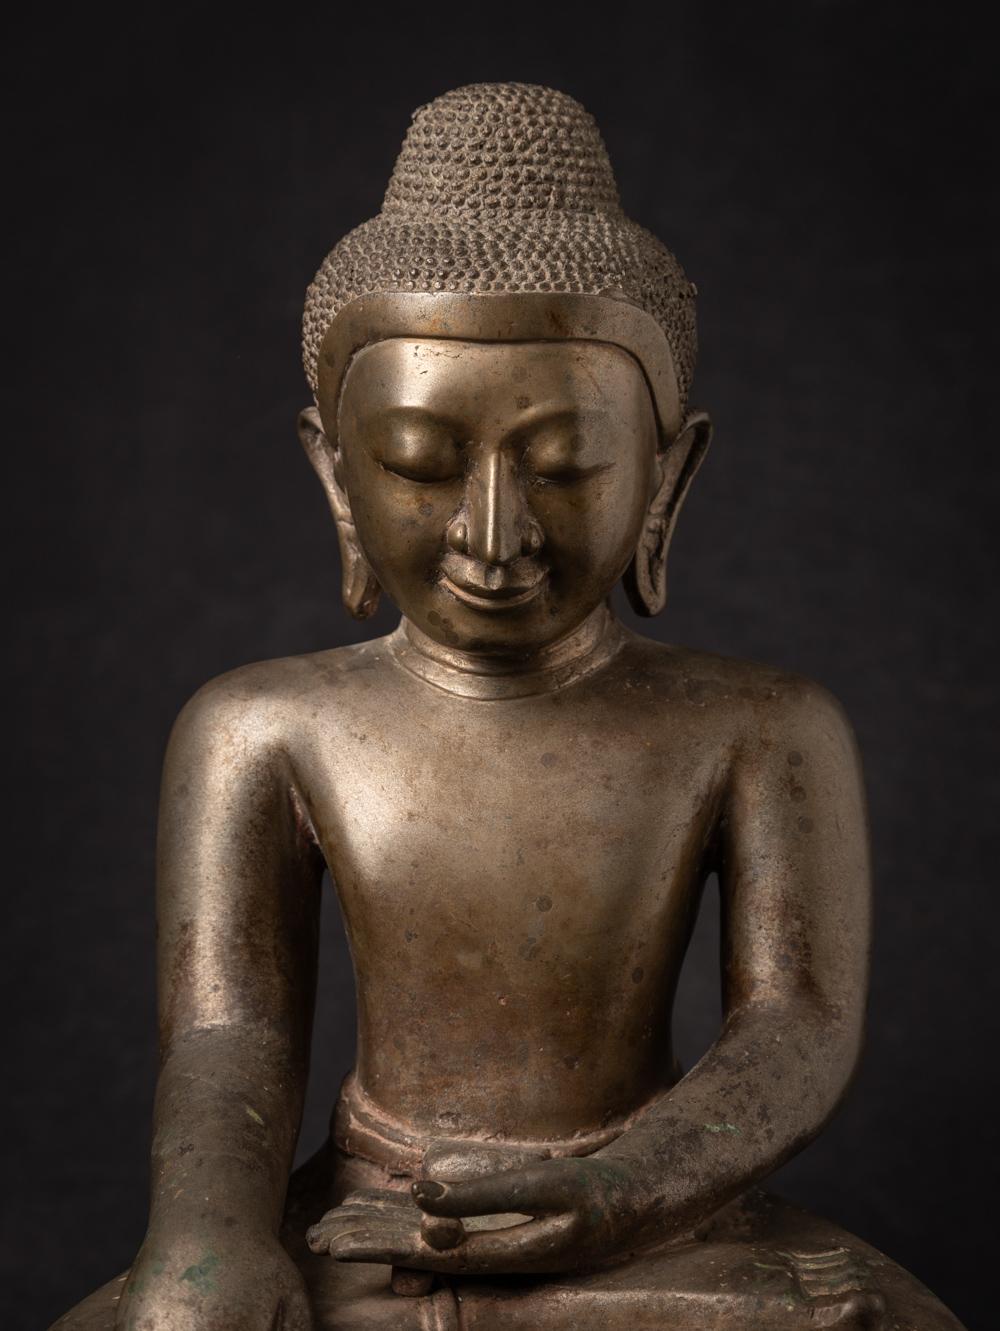 This Early 19th century Special antique bronze Burmese Buddha statue
 is a truly unique and special collectible piece. Standing at 39.5 cm high, 27.3 cm wide, and 20.3 cm deep, it is made of bronze, adding to its beauty and value. The intricate